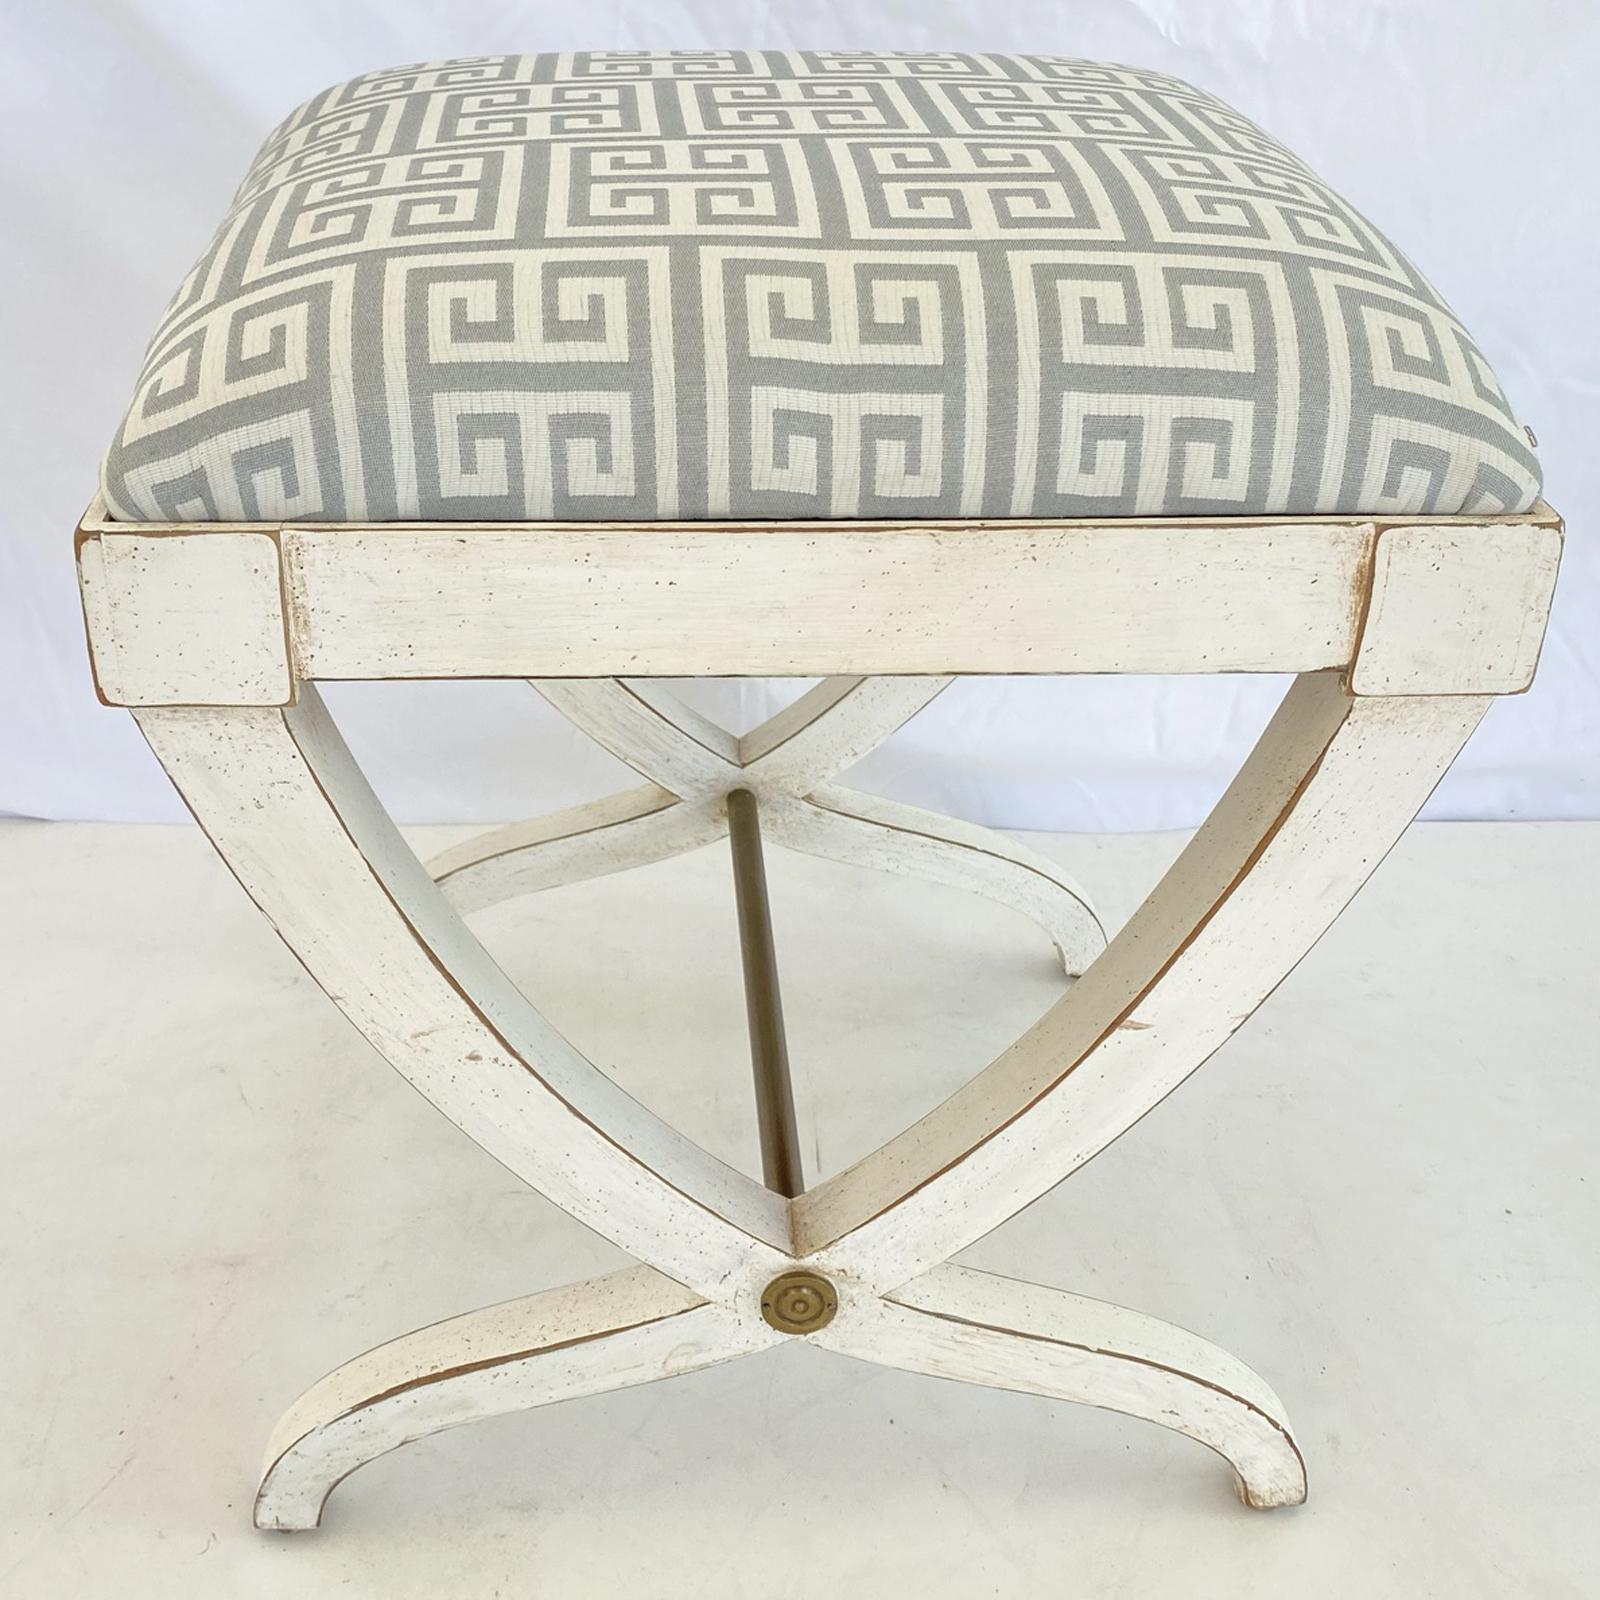 Vintage curule form stool, by Baker; having a square upholstered crown seat, on painted base. square section curving legs joined by brass pipe stretcher, legs centered by a rosette of brass.

Stock ID: D3008.